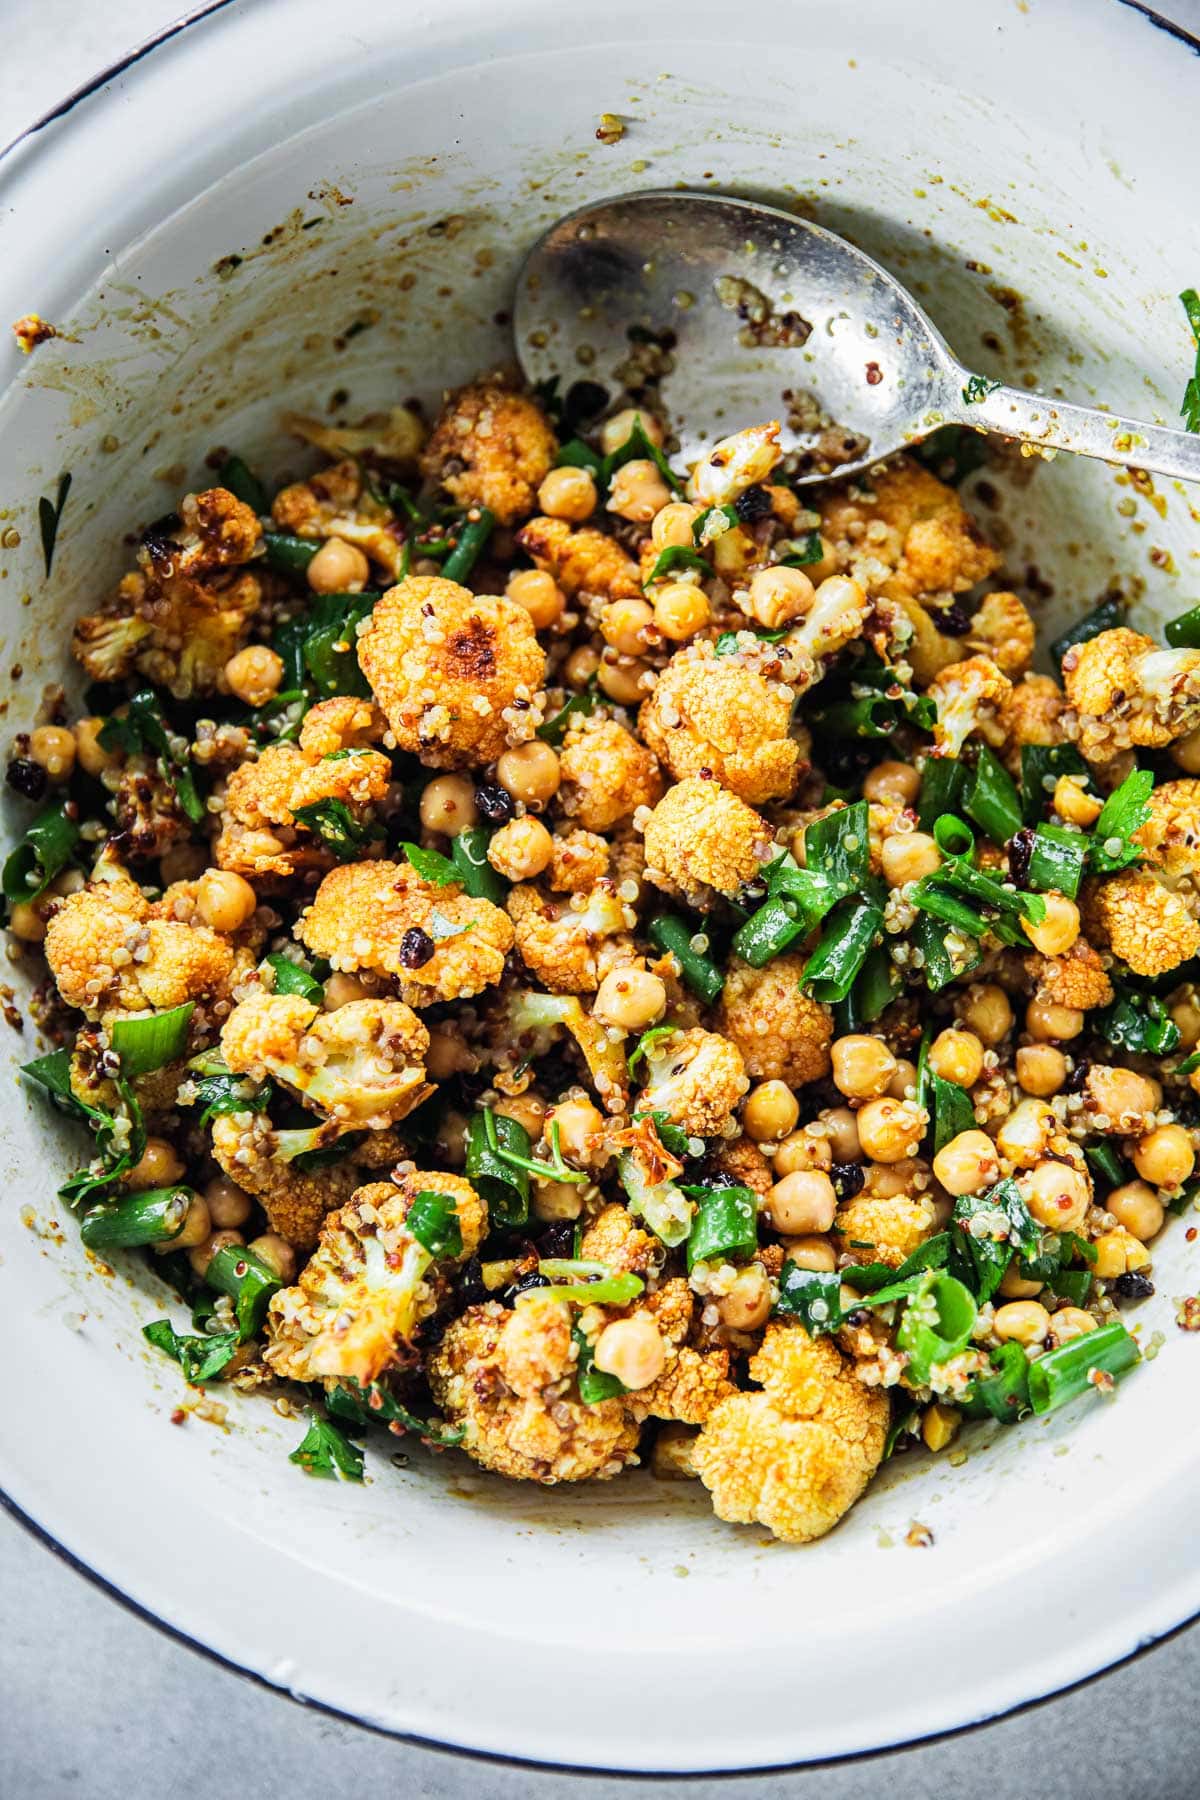 Roasted Cauliflower Salad. With Chickpeas and Quinoa mixed in a large bowl with salad dressing.